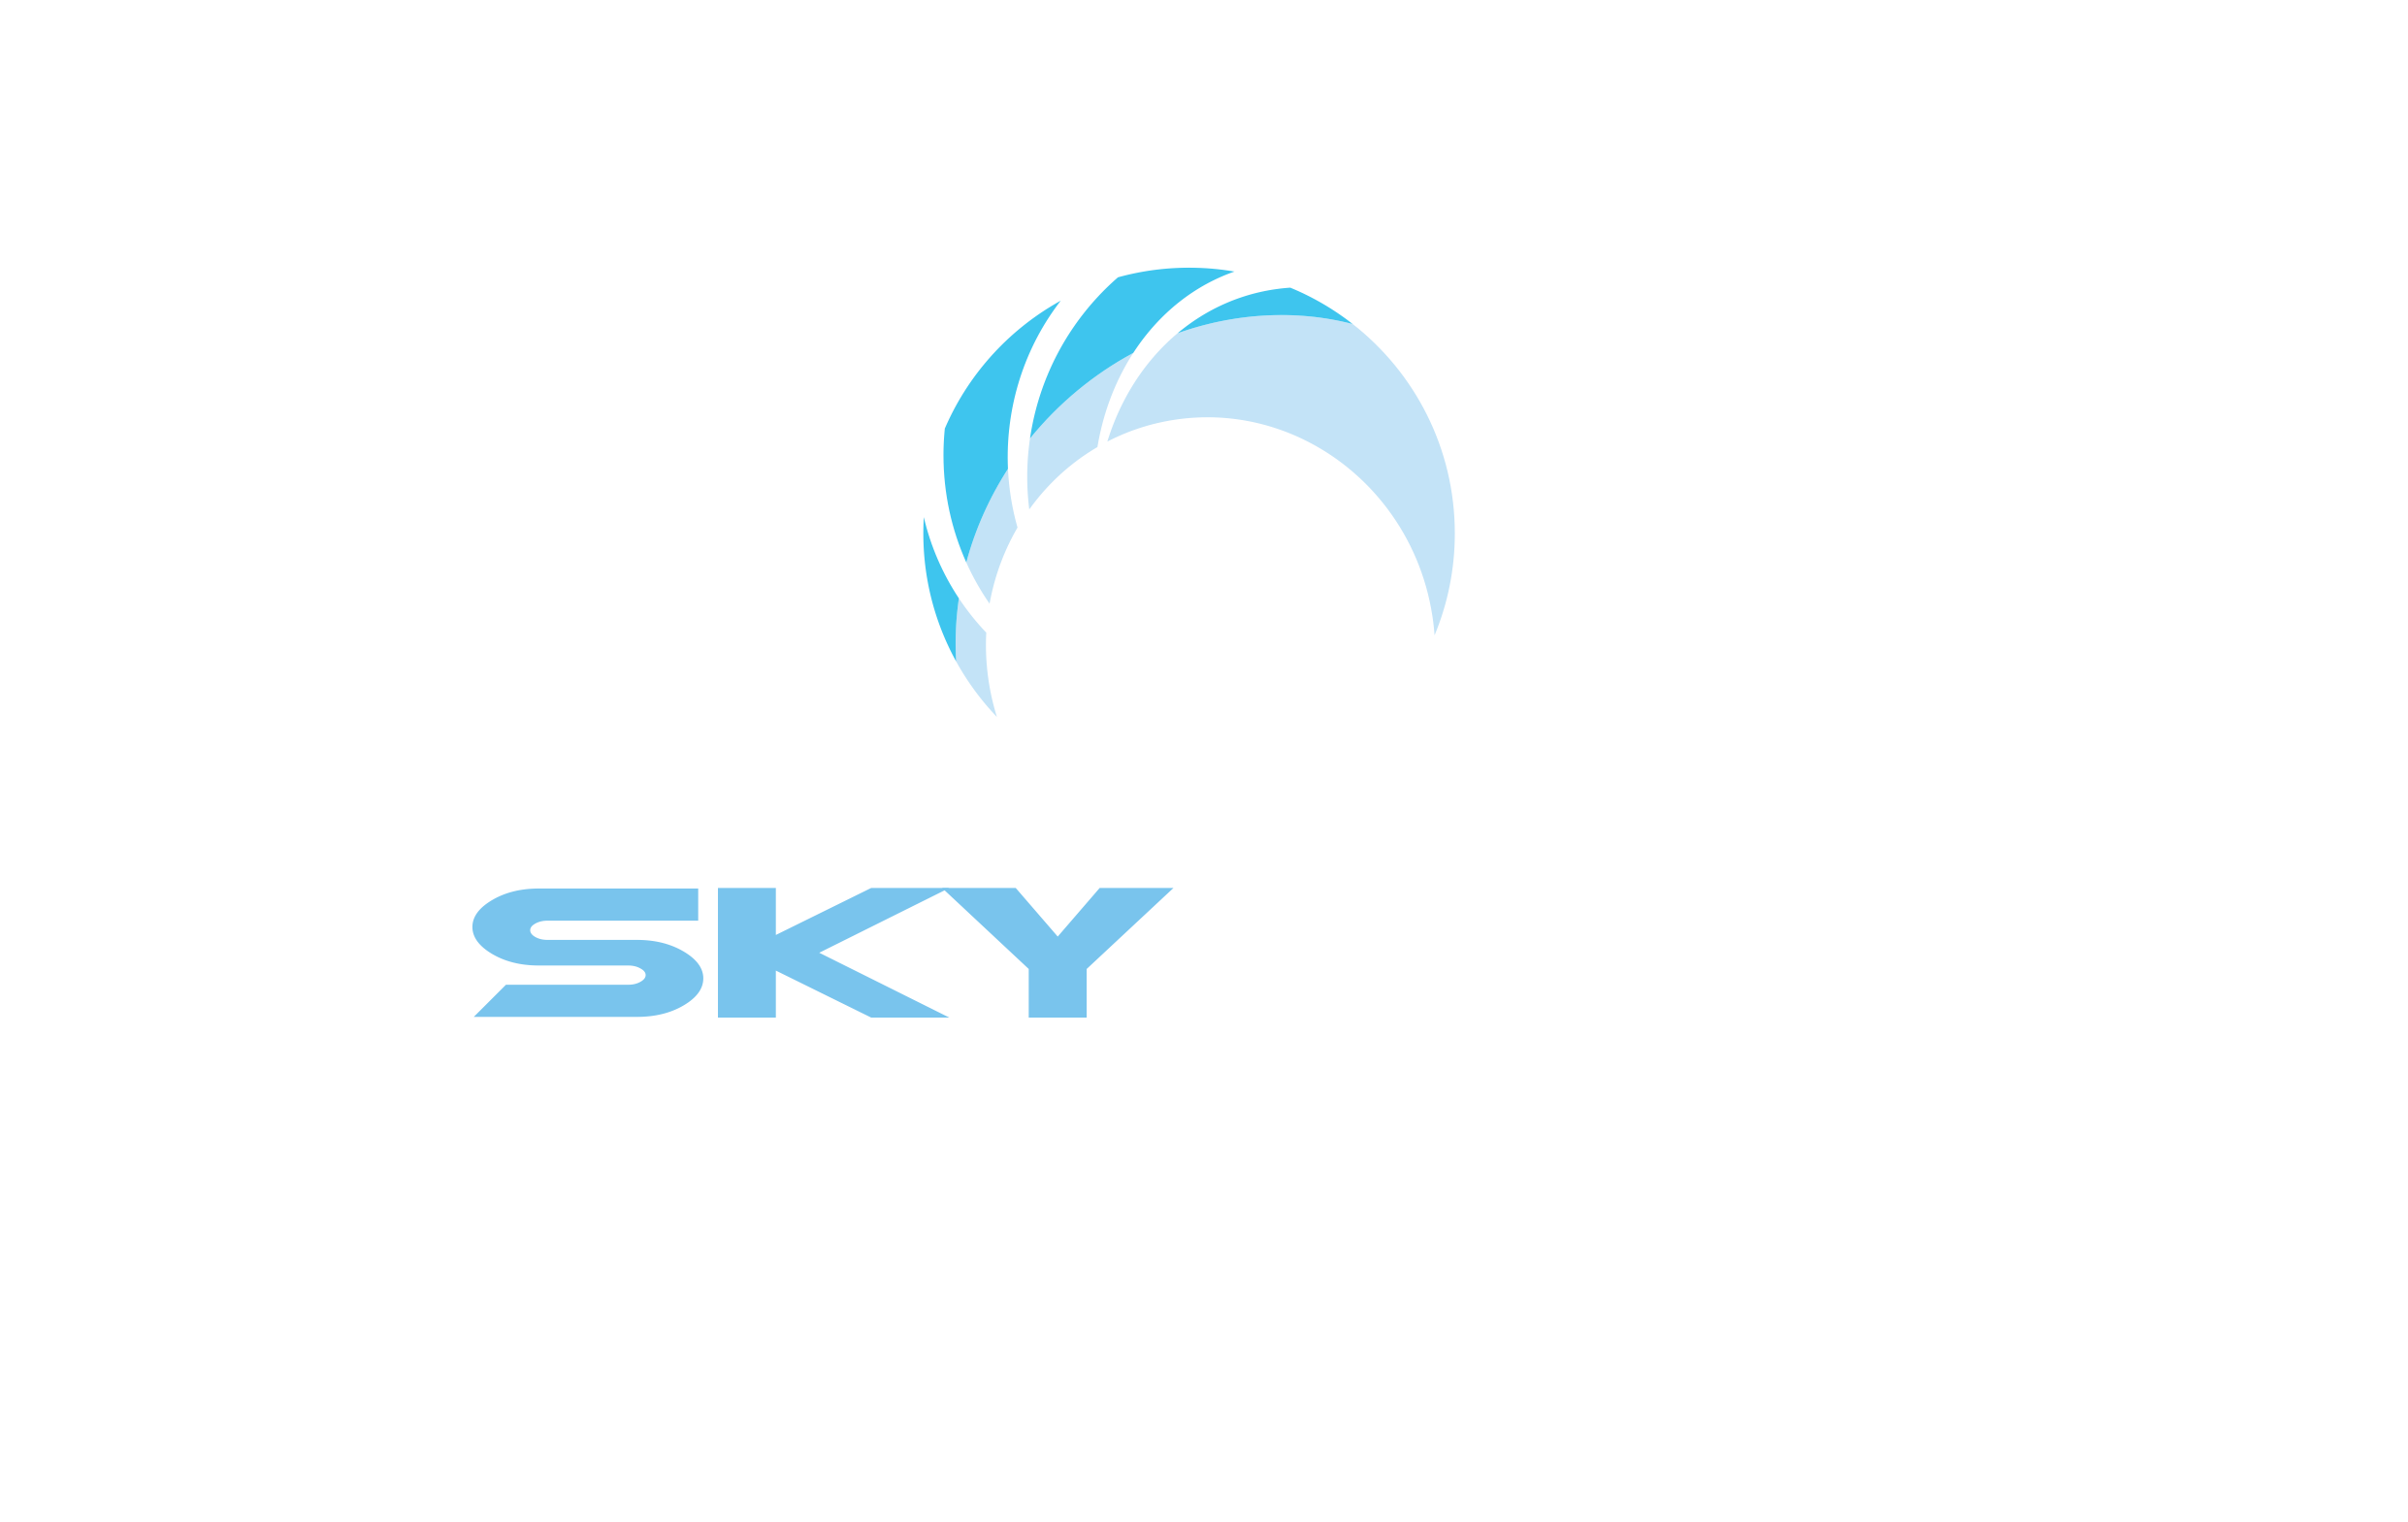 Skydive Chatteris